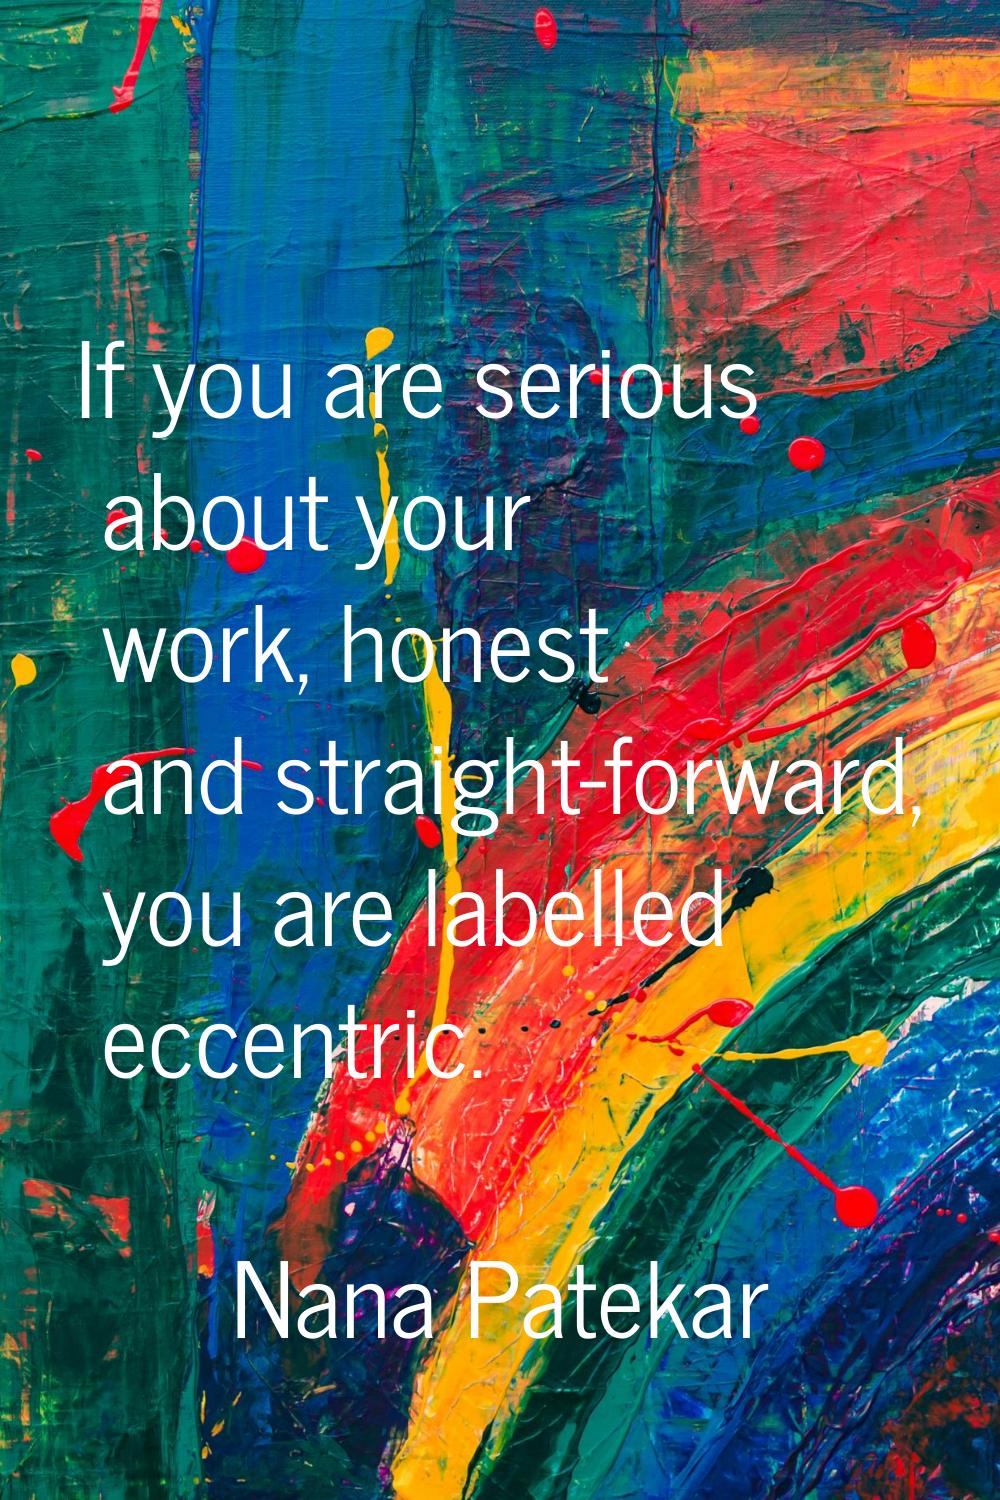 If you are serious about your work, honest and straight-forward, you are labelled eccentric.